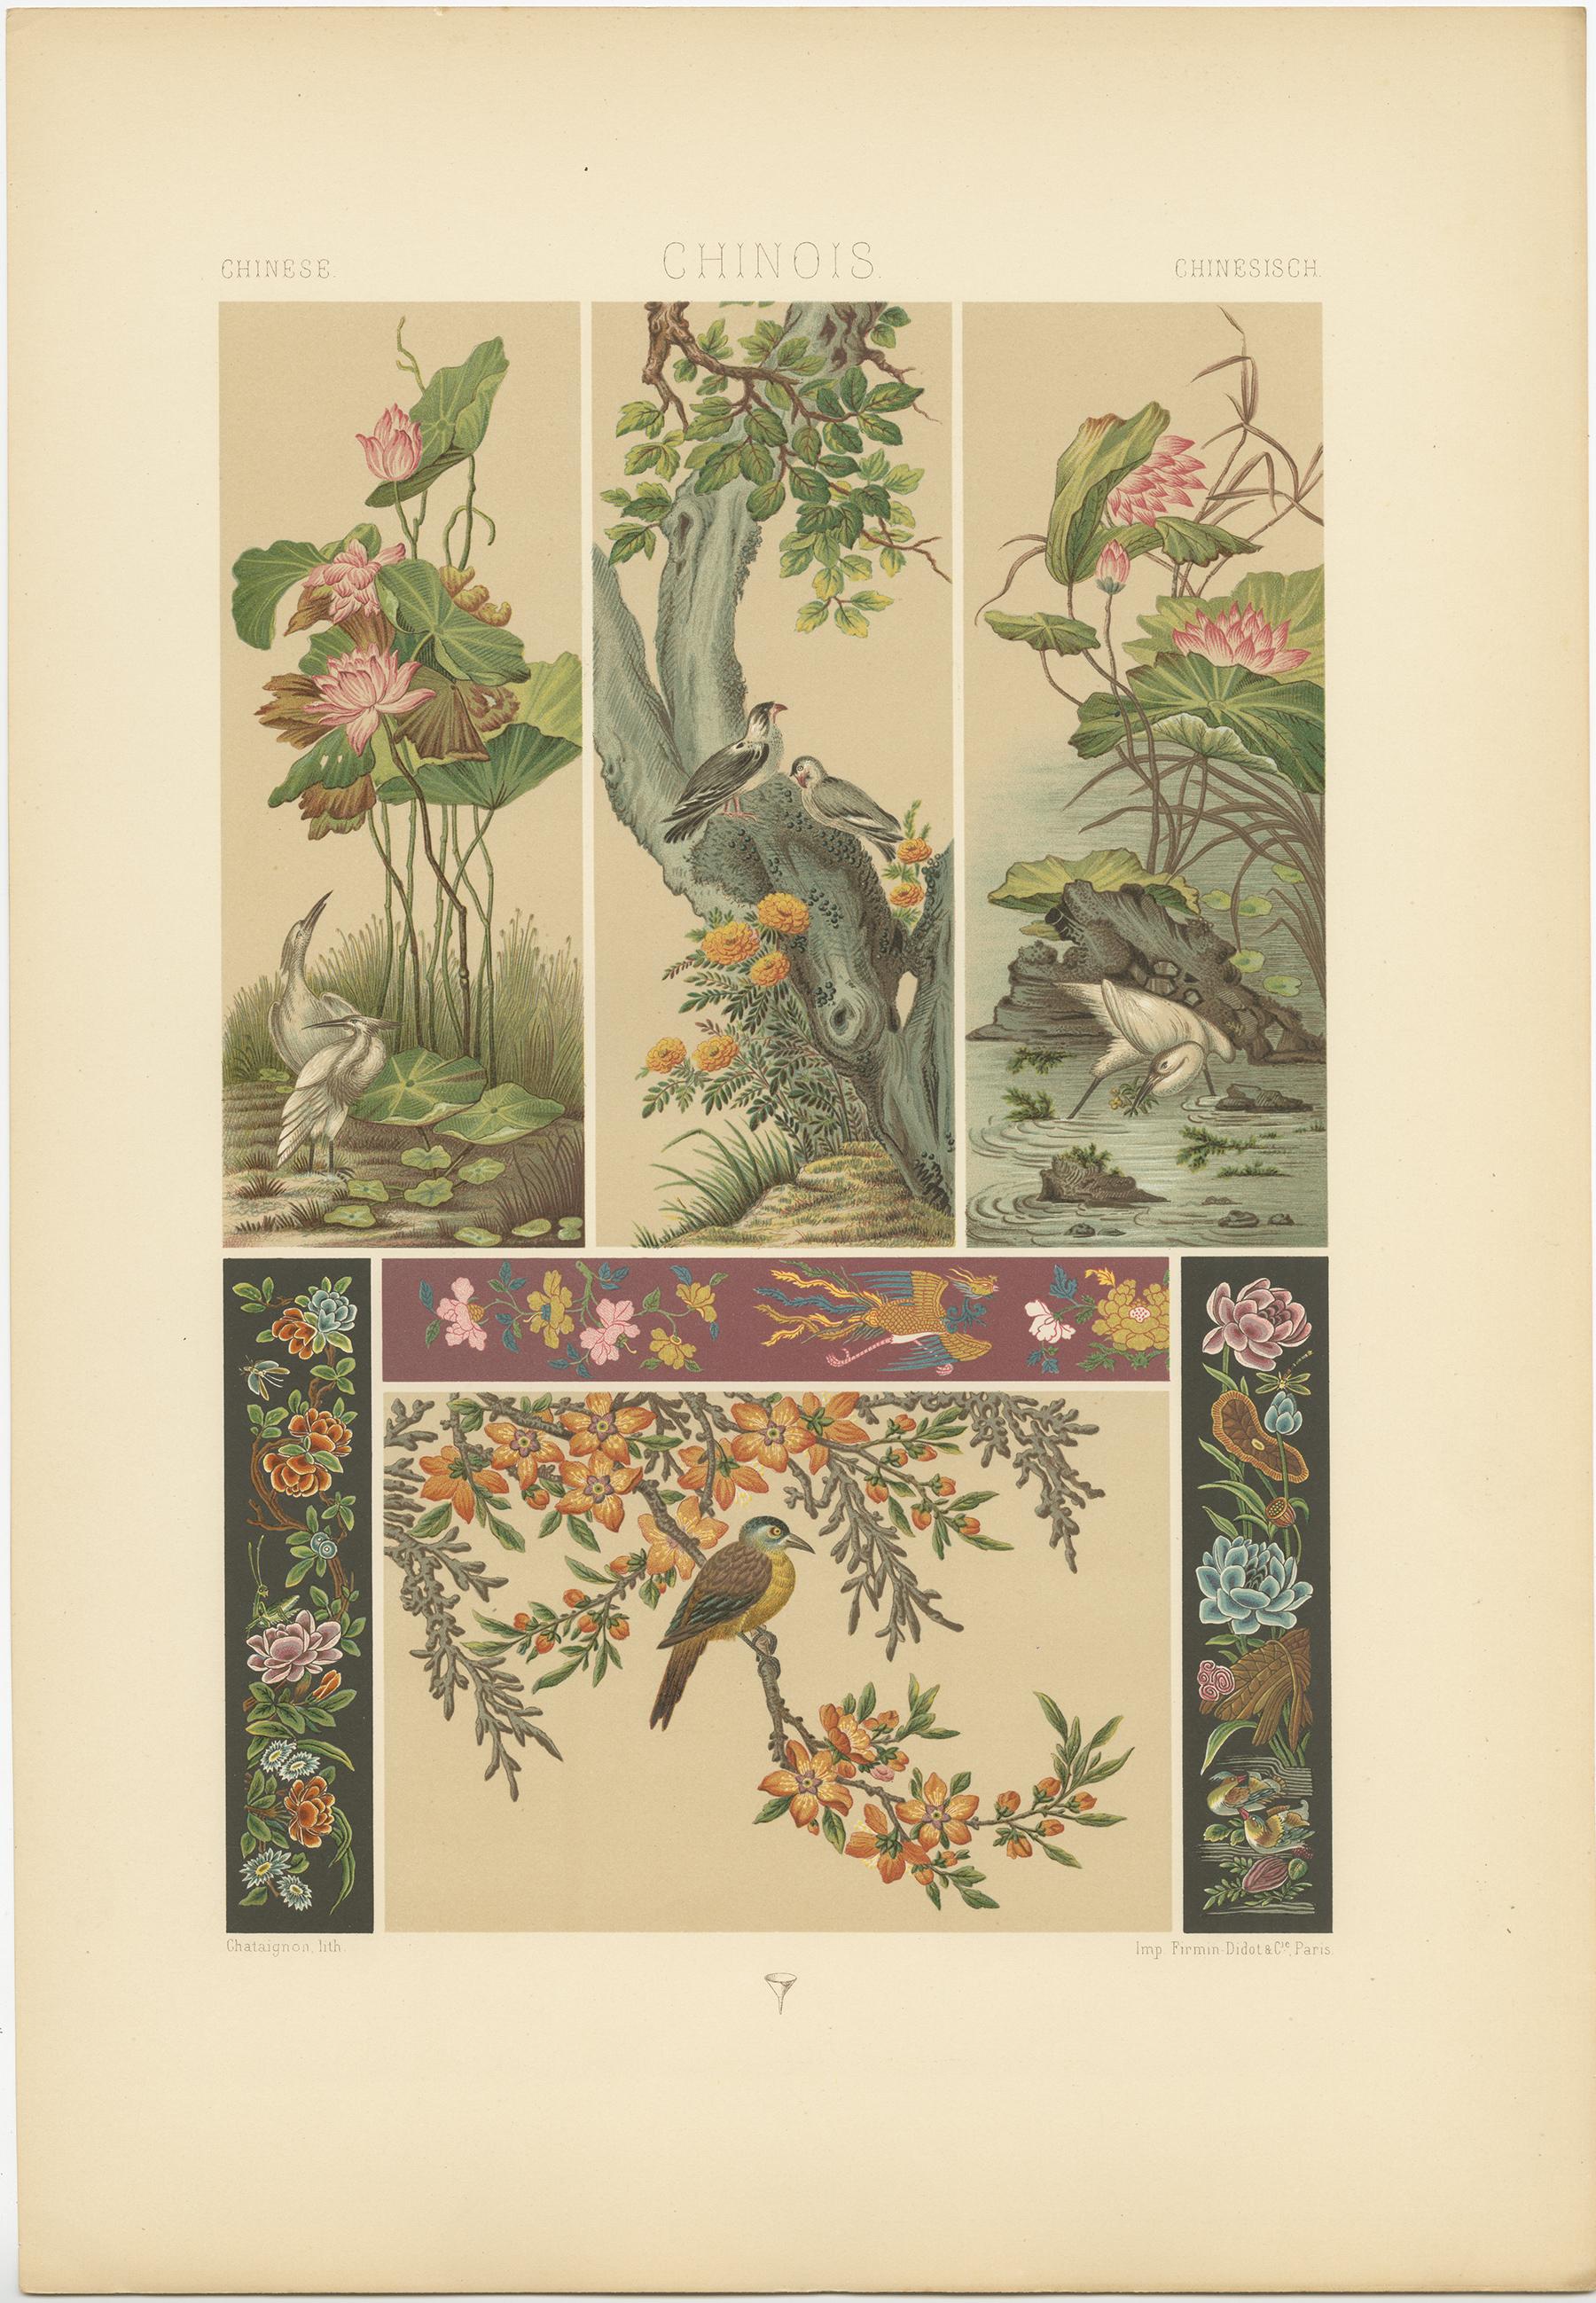 Antique print titled 'Chinese - Chinois - Chinesisch'. Chromolithograph of Chinese paintings, embroideries, printed fabrics ornaments. This print originates from 'l'Ornement Polychrome' by Auguste Racinet. Published circa 1890.